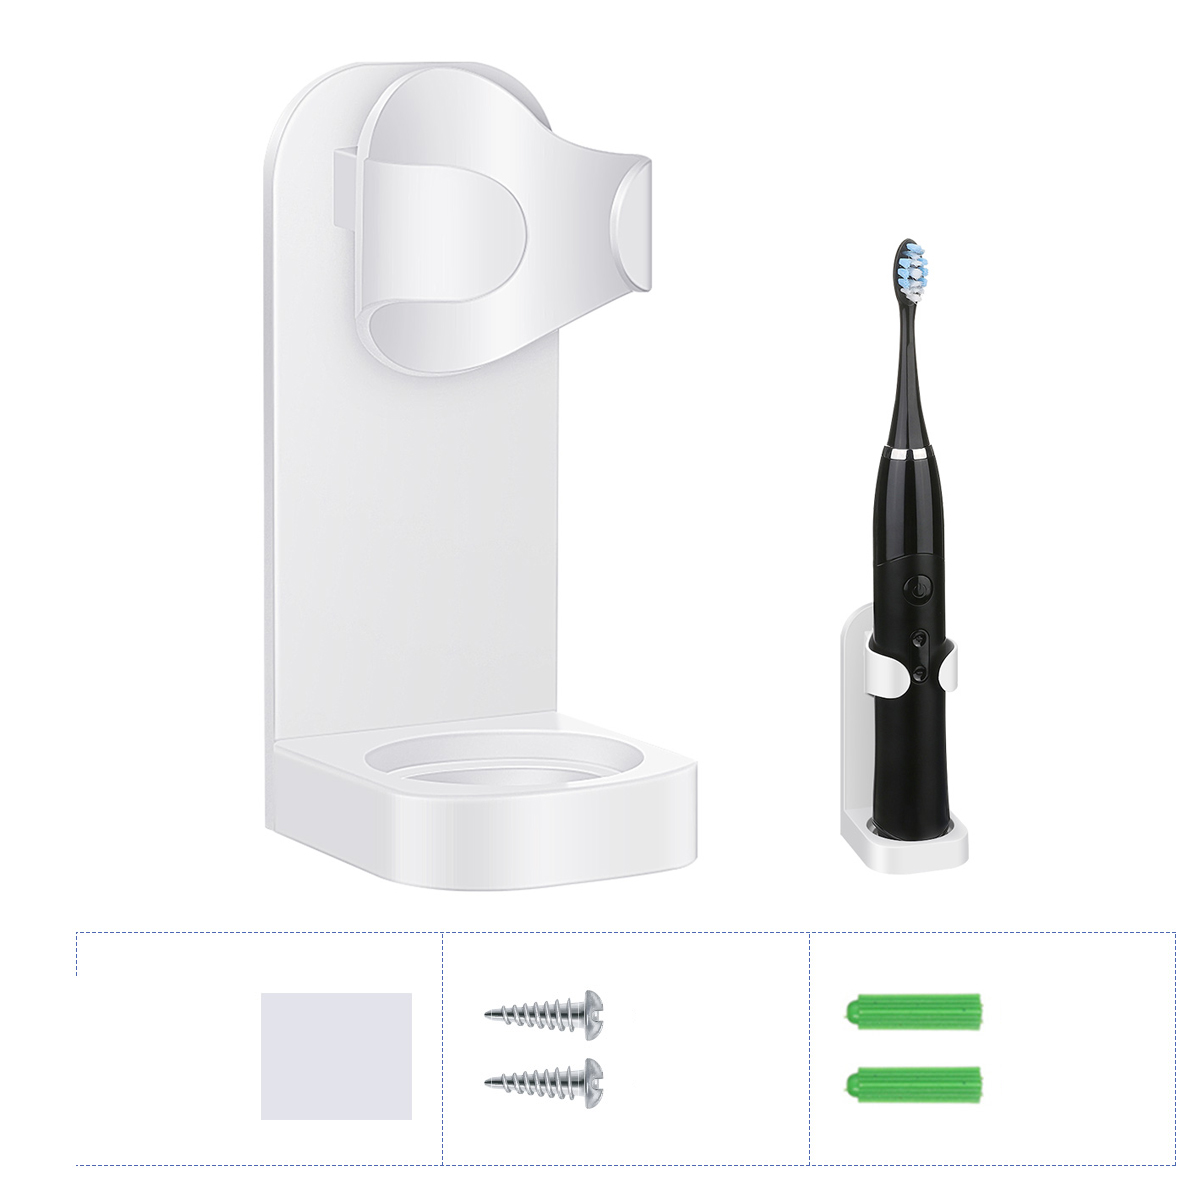 Wall Mounted Electric Toothbrush Holder Bathroom Holder Bracket Plastic Products Toothpaste Storage Rack